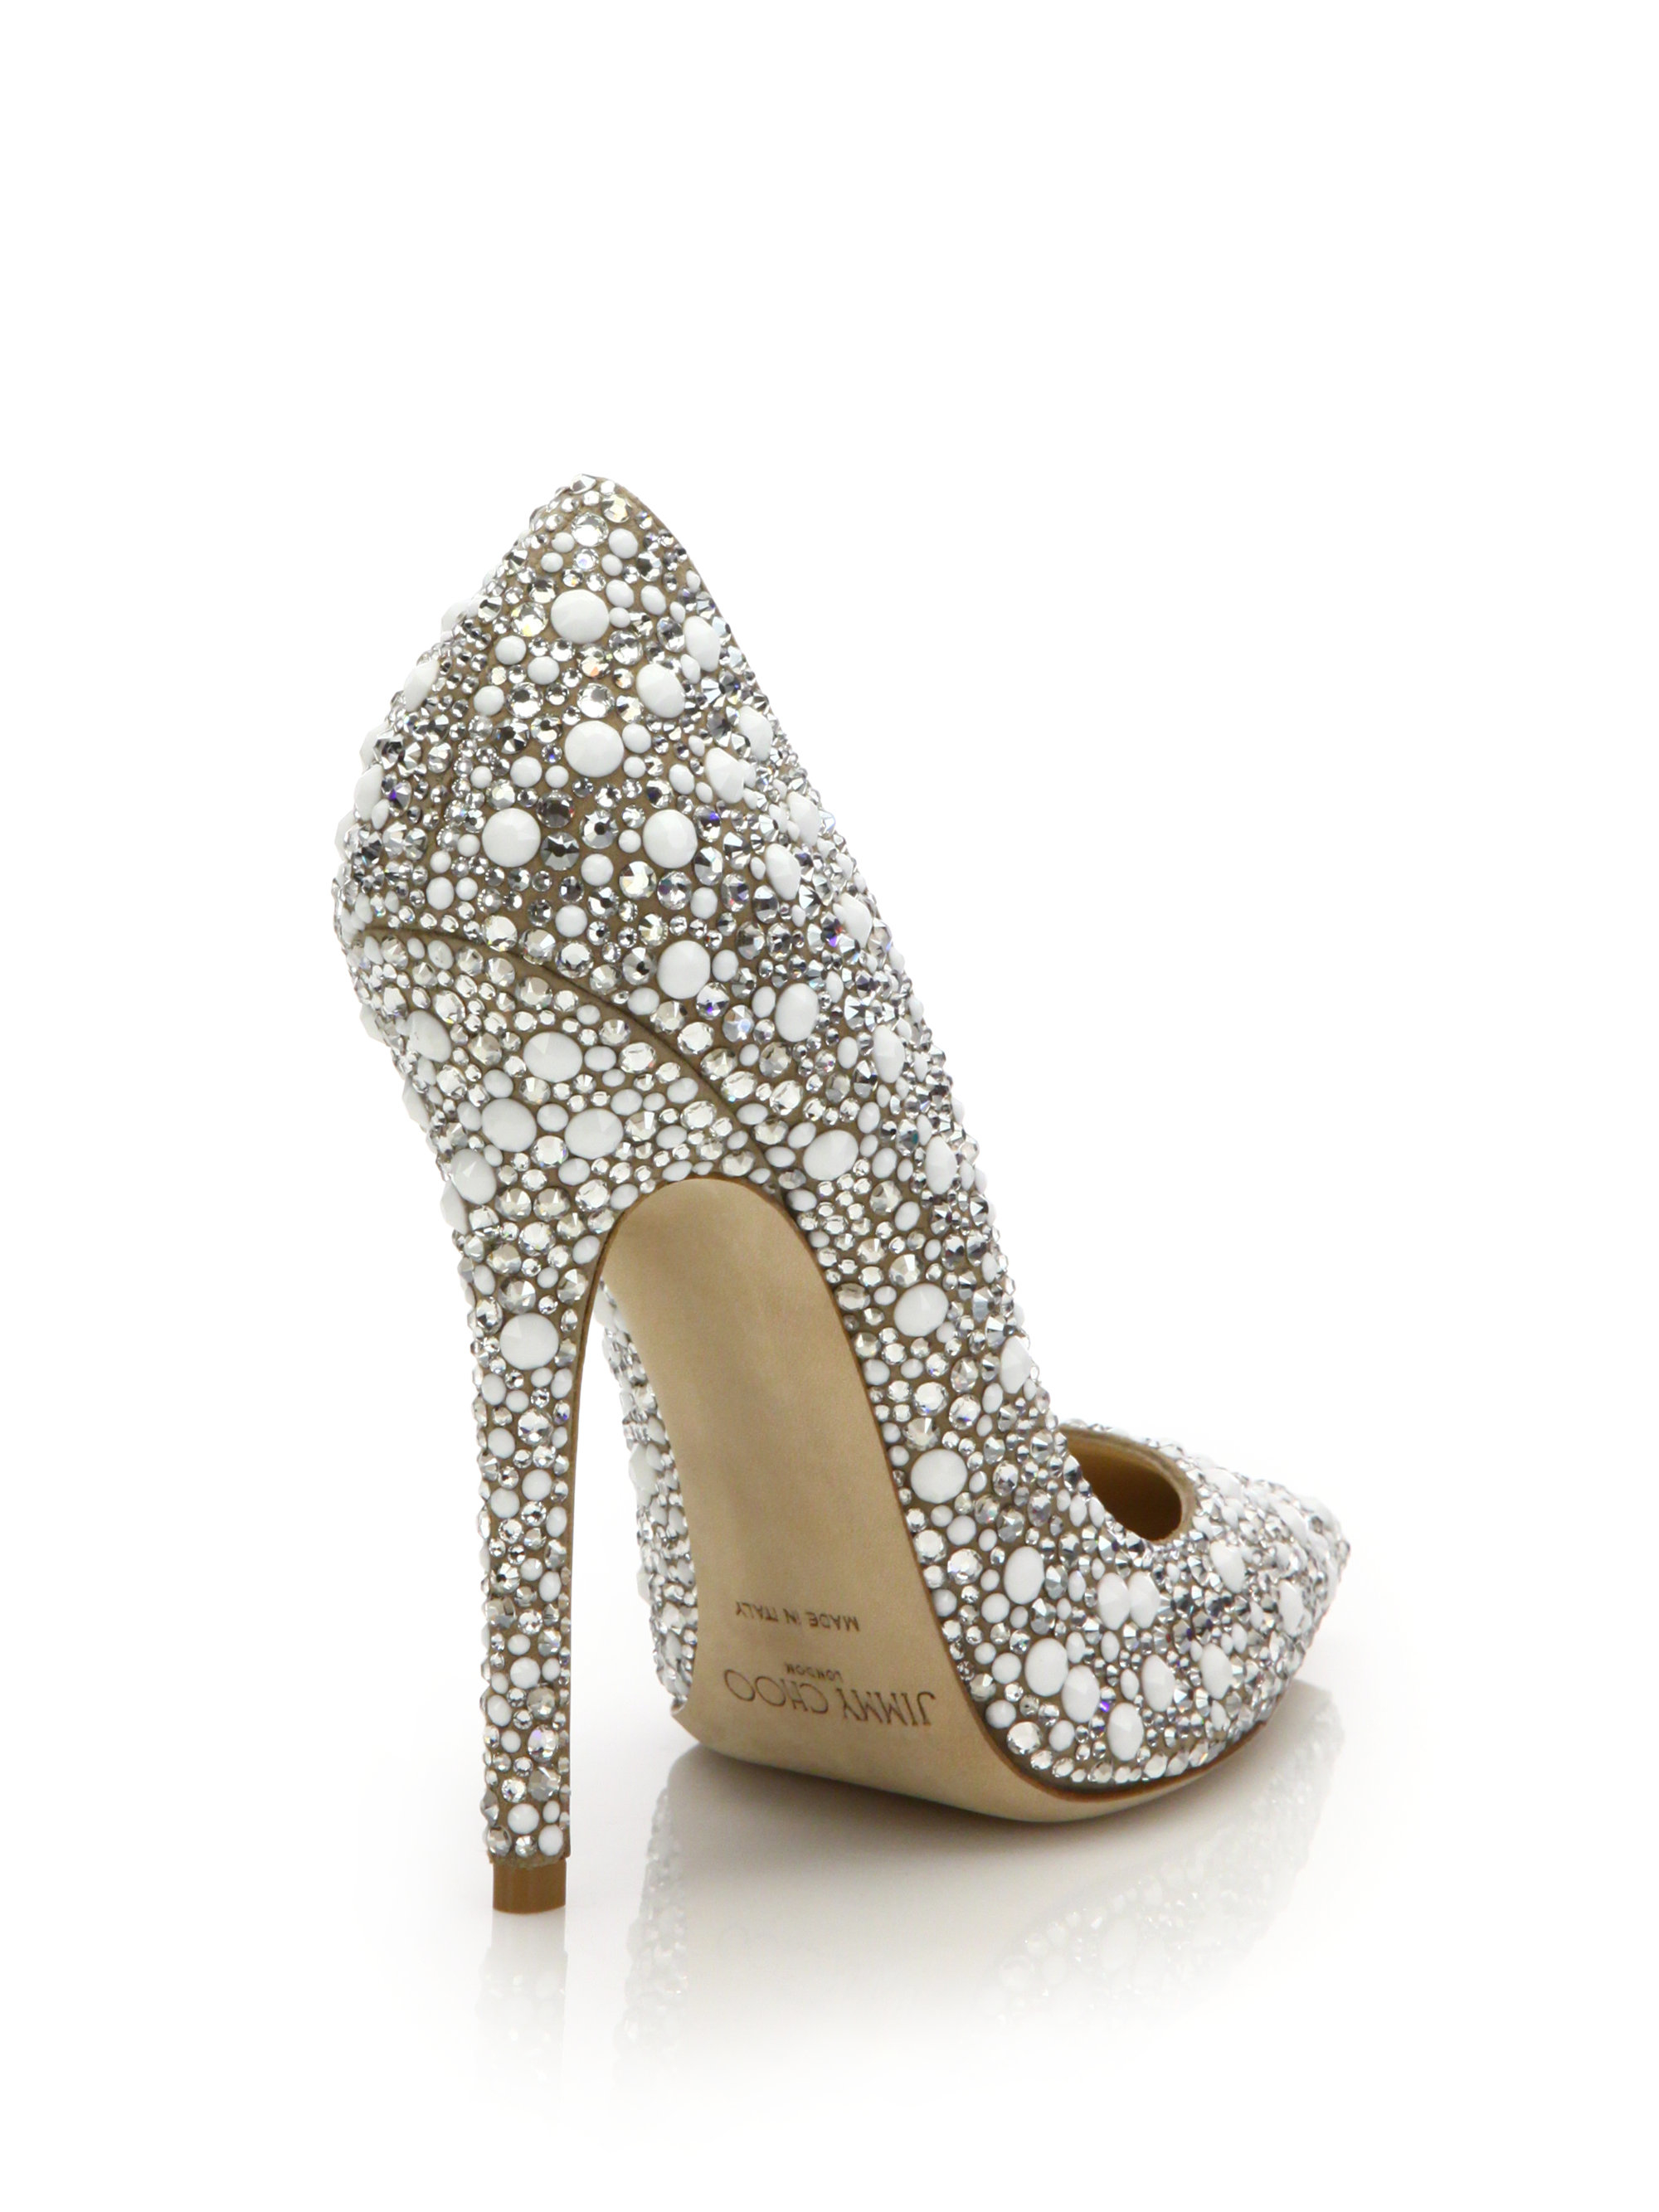 Lyst - Jimmy Choo Anouk 120 Crystal-embellished Suede Pumps in White